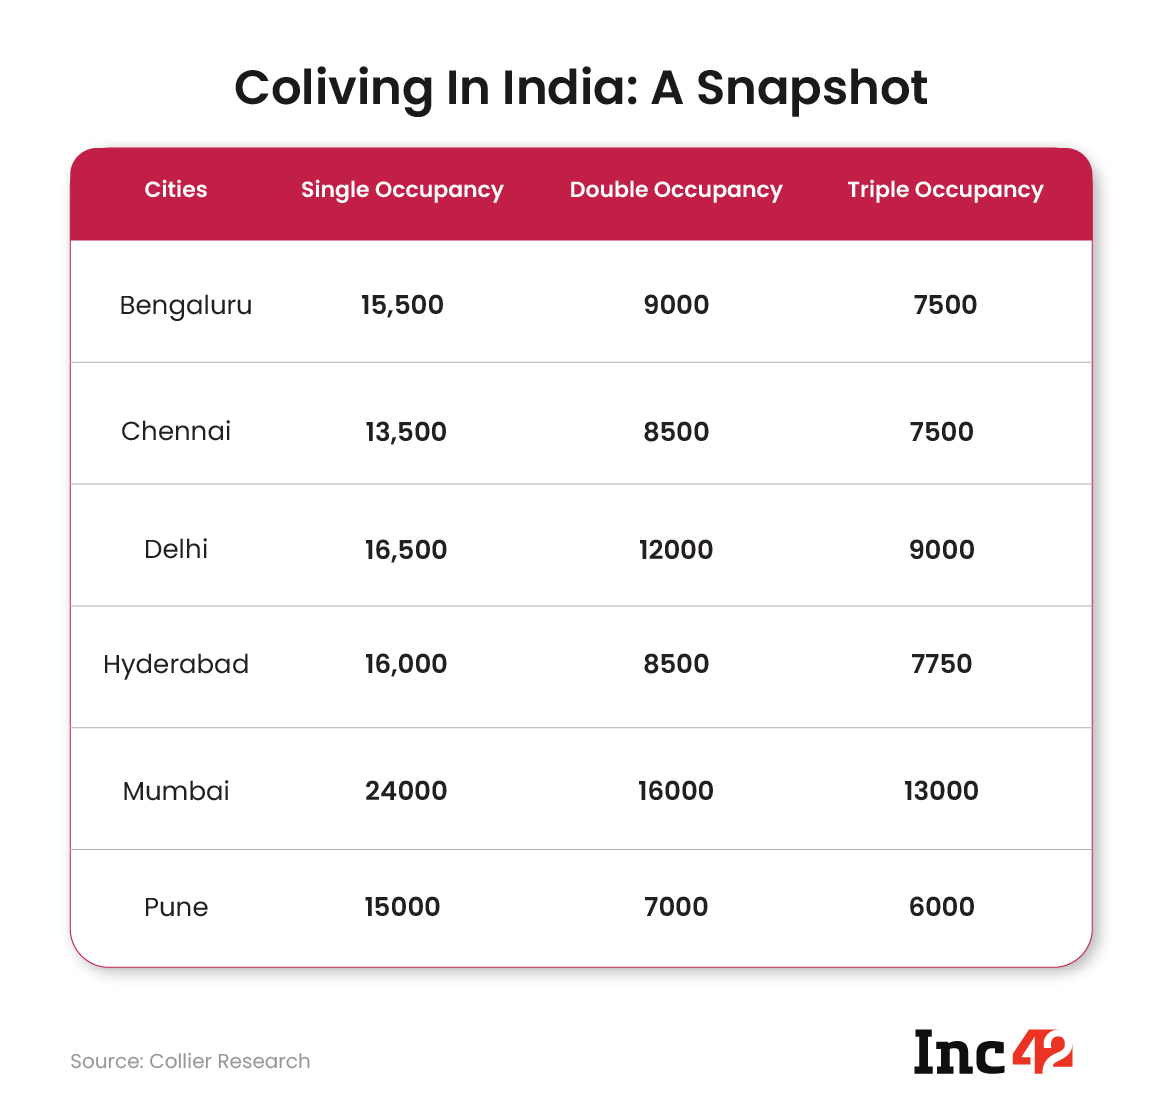 Coliving In India: A Snapshot by City